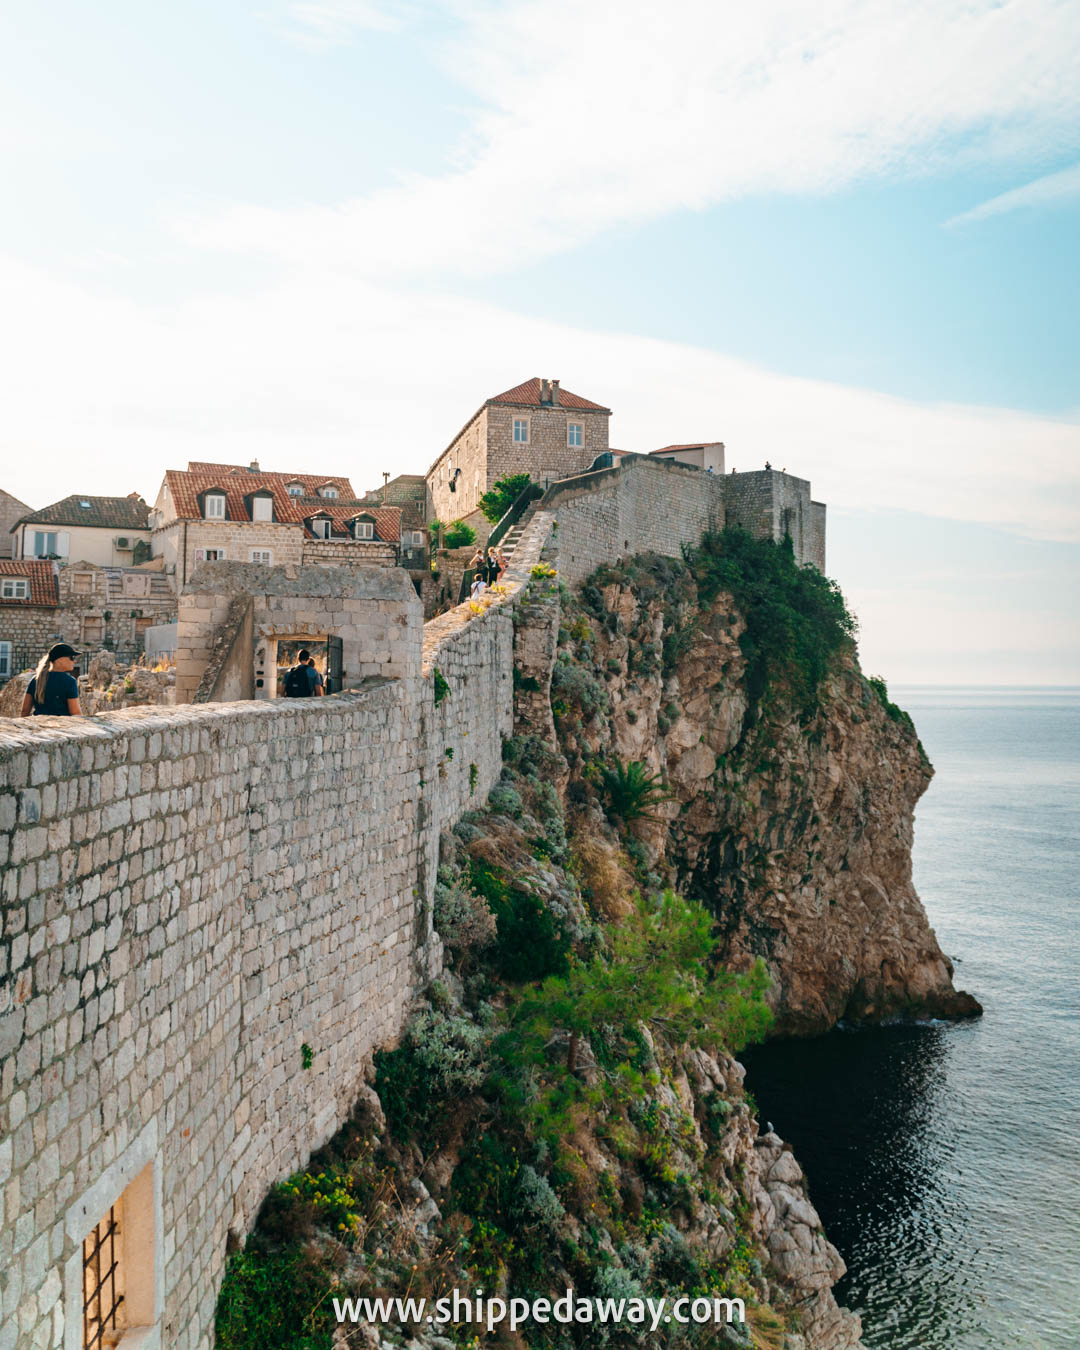 best things to do in dubrovnik, dubrovnik city walls, dubrovnik travel guide, dubrovnik old town, dubrovnik croatia, dubrovnik attractions, dubrovnik pass